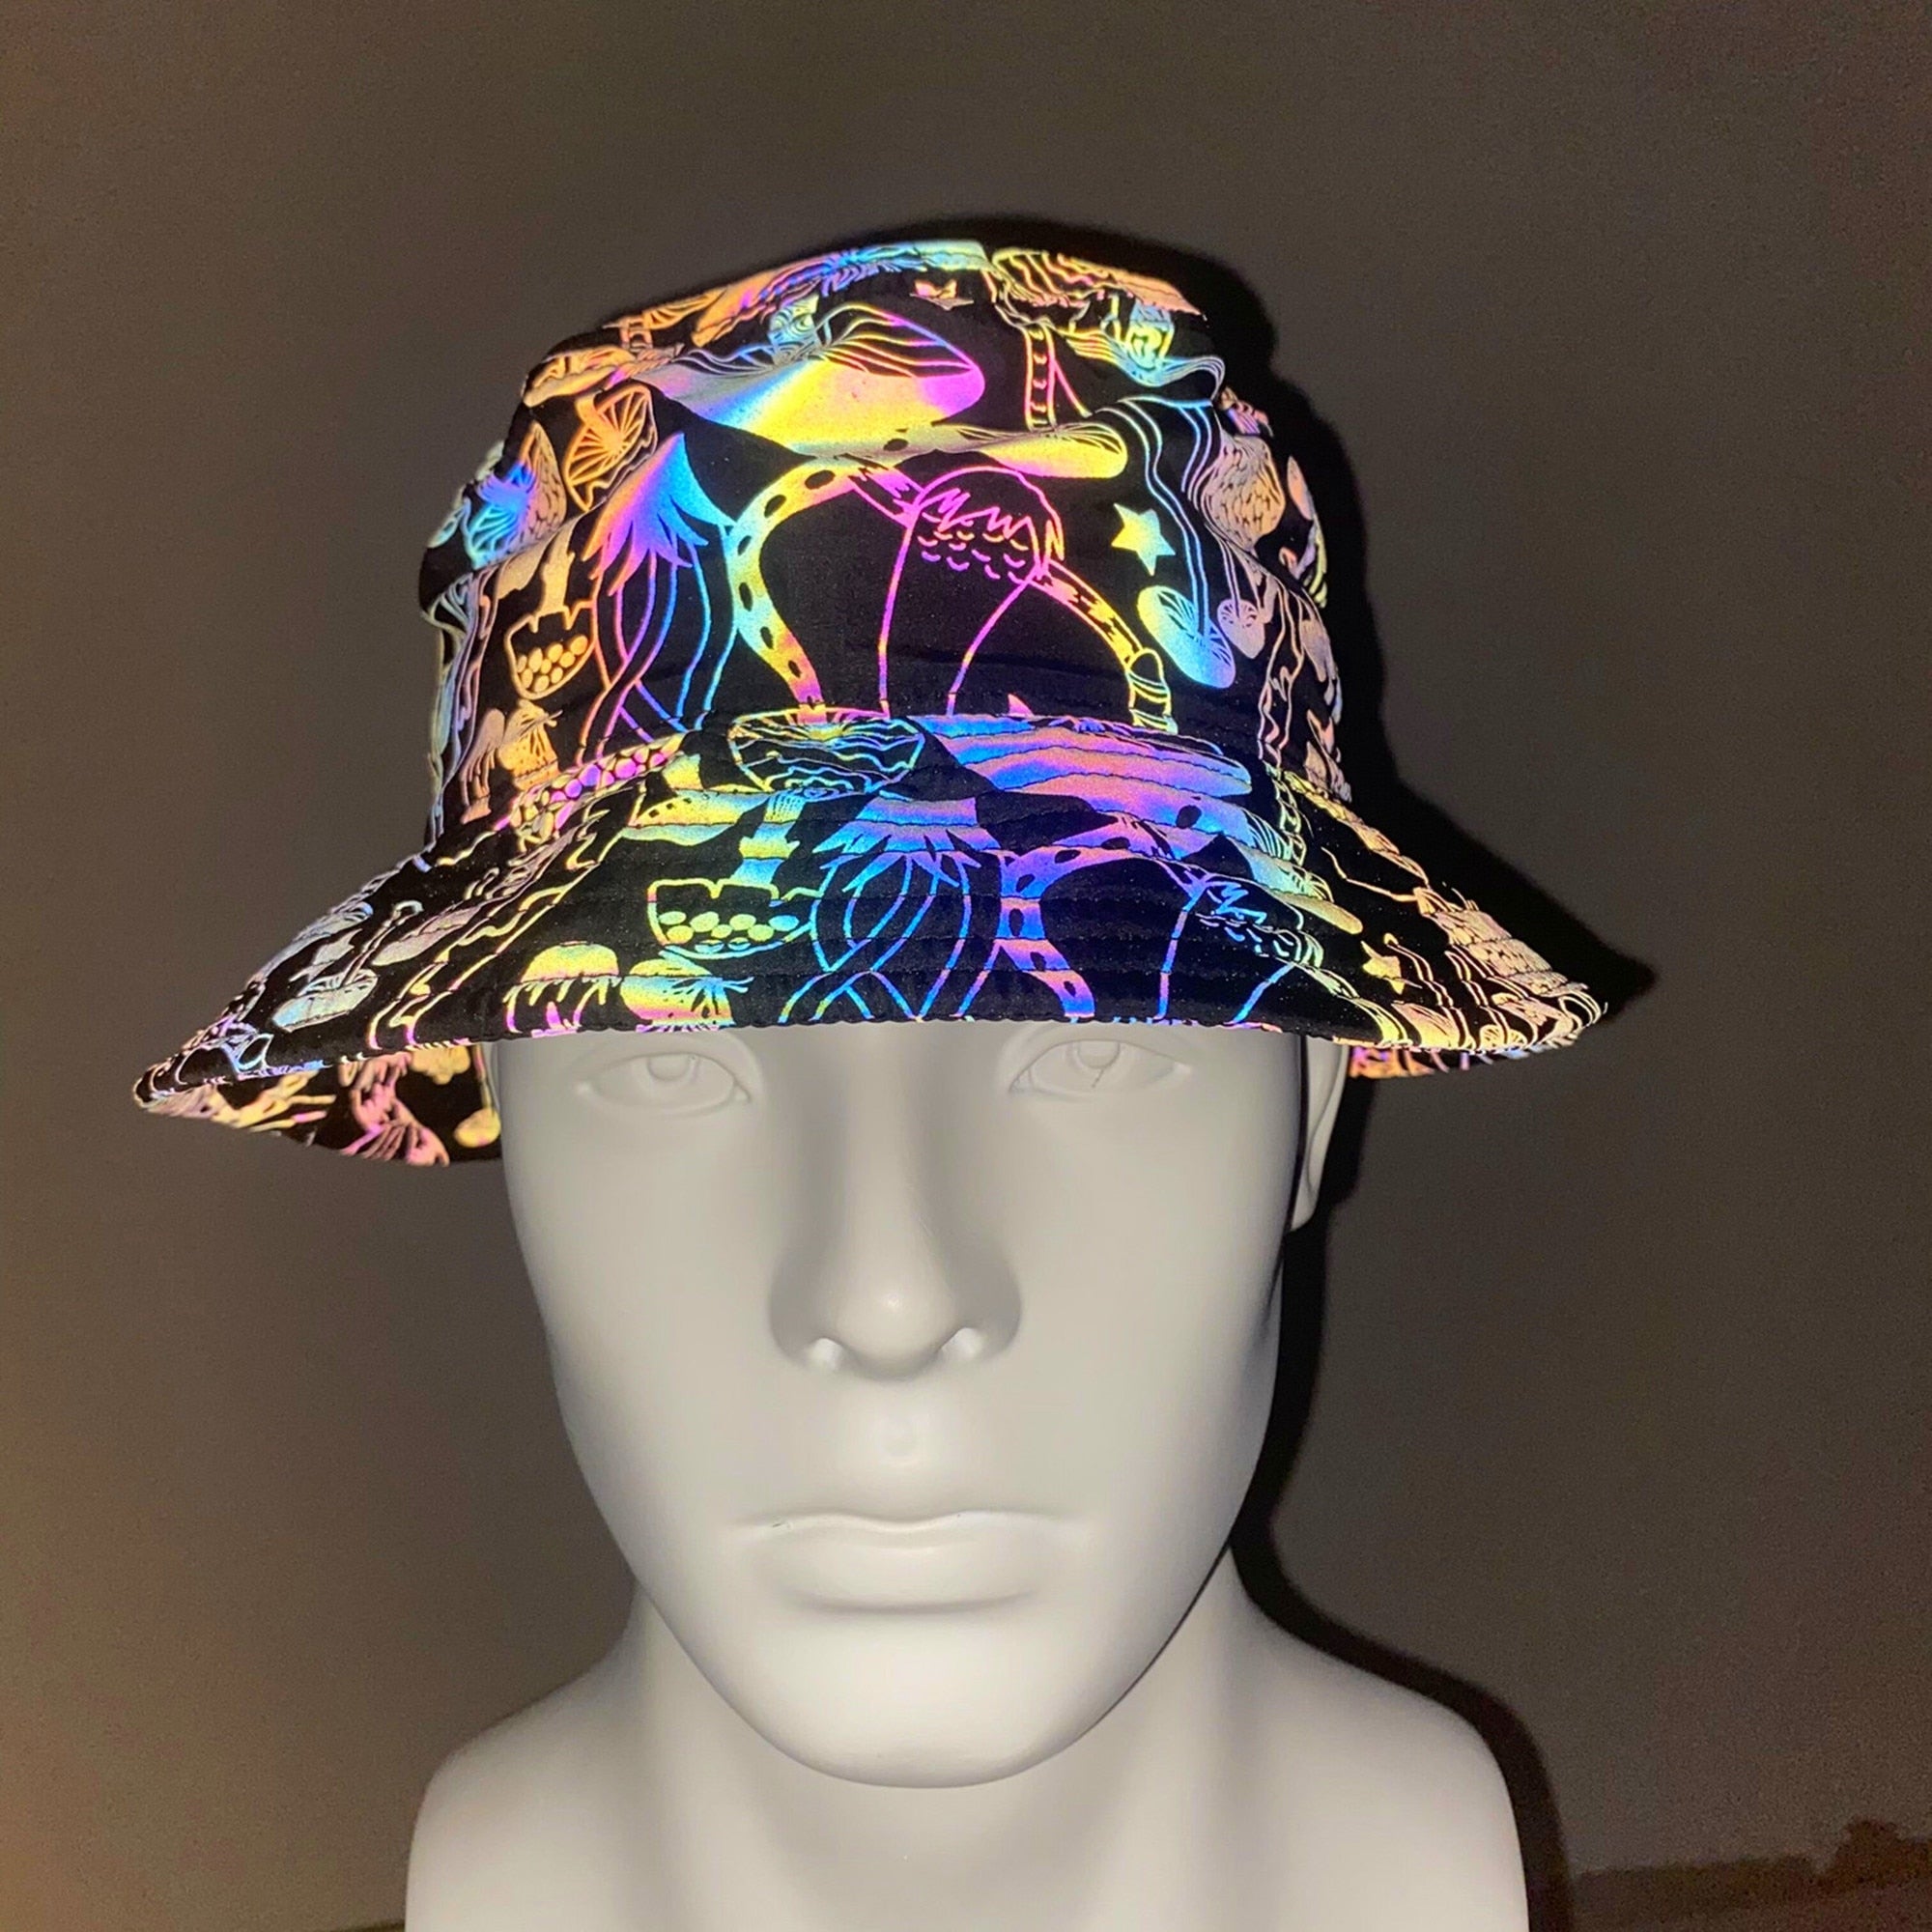 Discover a new and exciting way to express your style with hip HOLOGRAPHIC RAVE BUCKET HATS. Featuring a bold holographic design, these bucket hats are perfect for any Music Festival or Rave. Show off your unique fashion sense while staying safe, comfortable, and protected from the sun with these Trippy Rave Inspired Designs! 